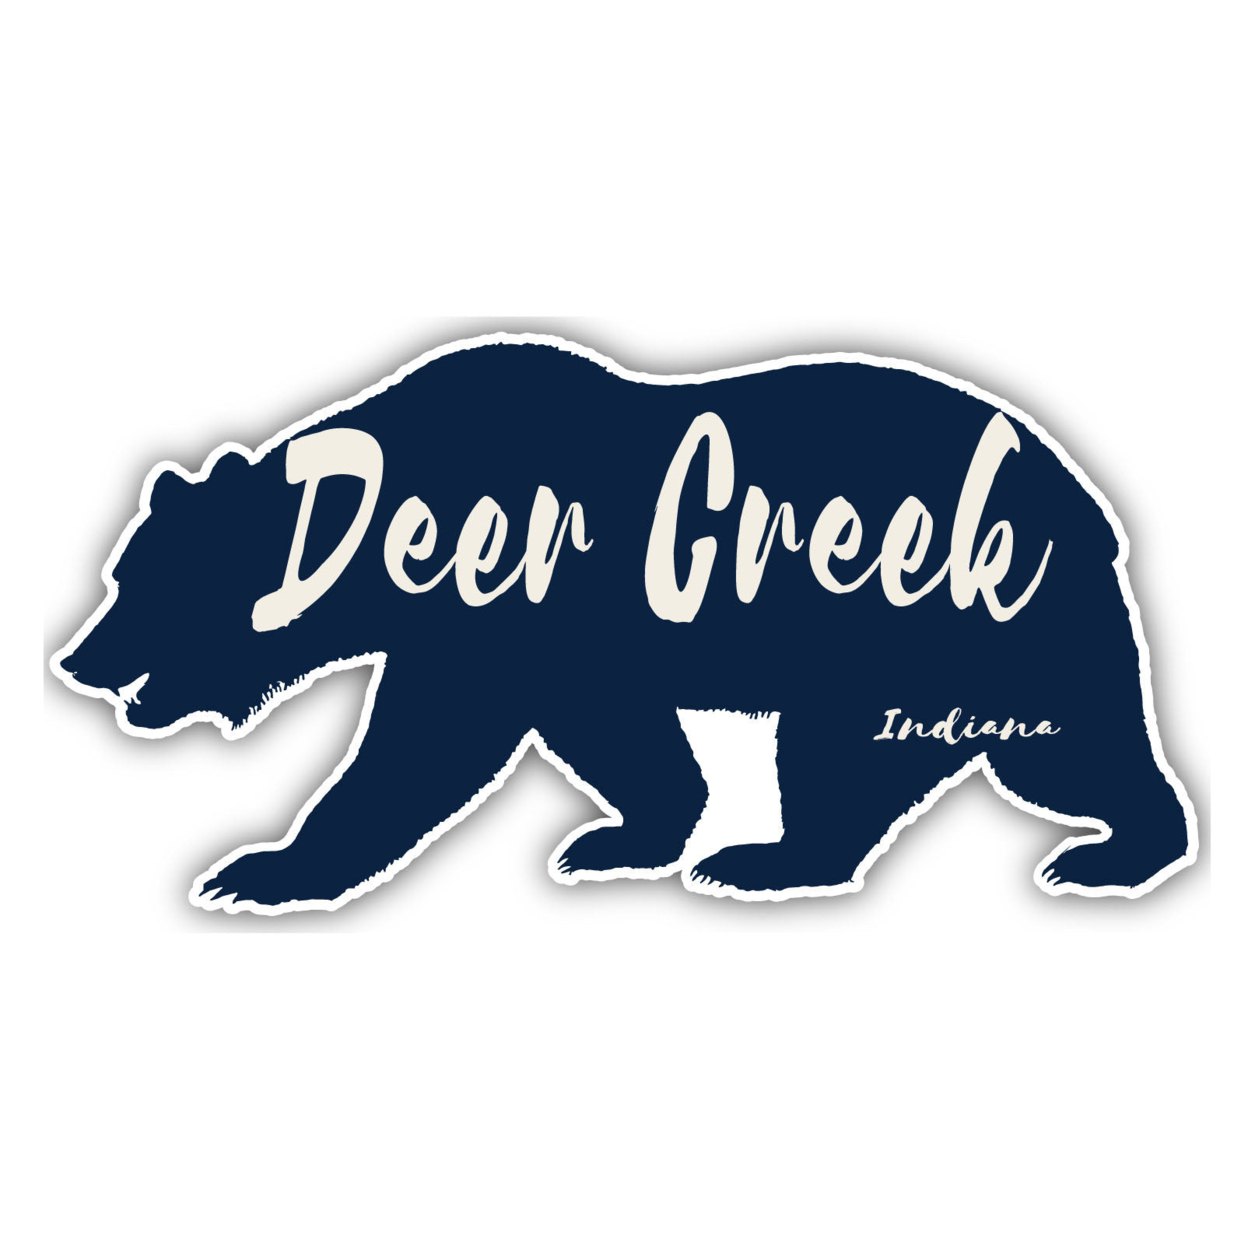 Deer Creek Indiana Souvenir Decorative Stickers (Choose Theme And Size) - 4-Pack, 8-Inch, Great Outdoors